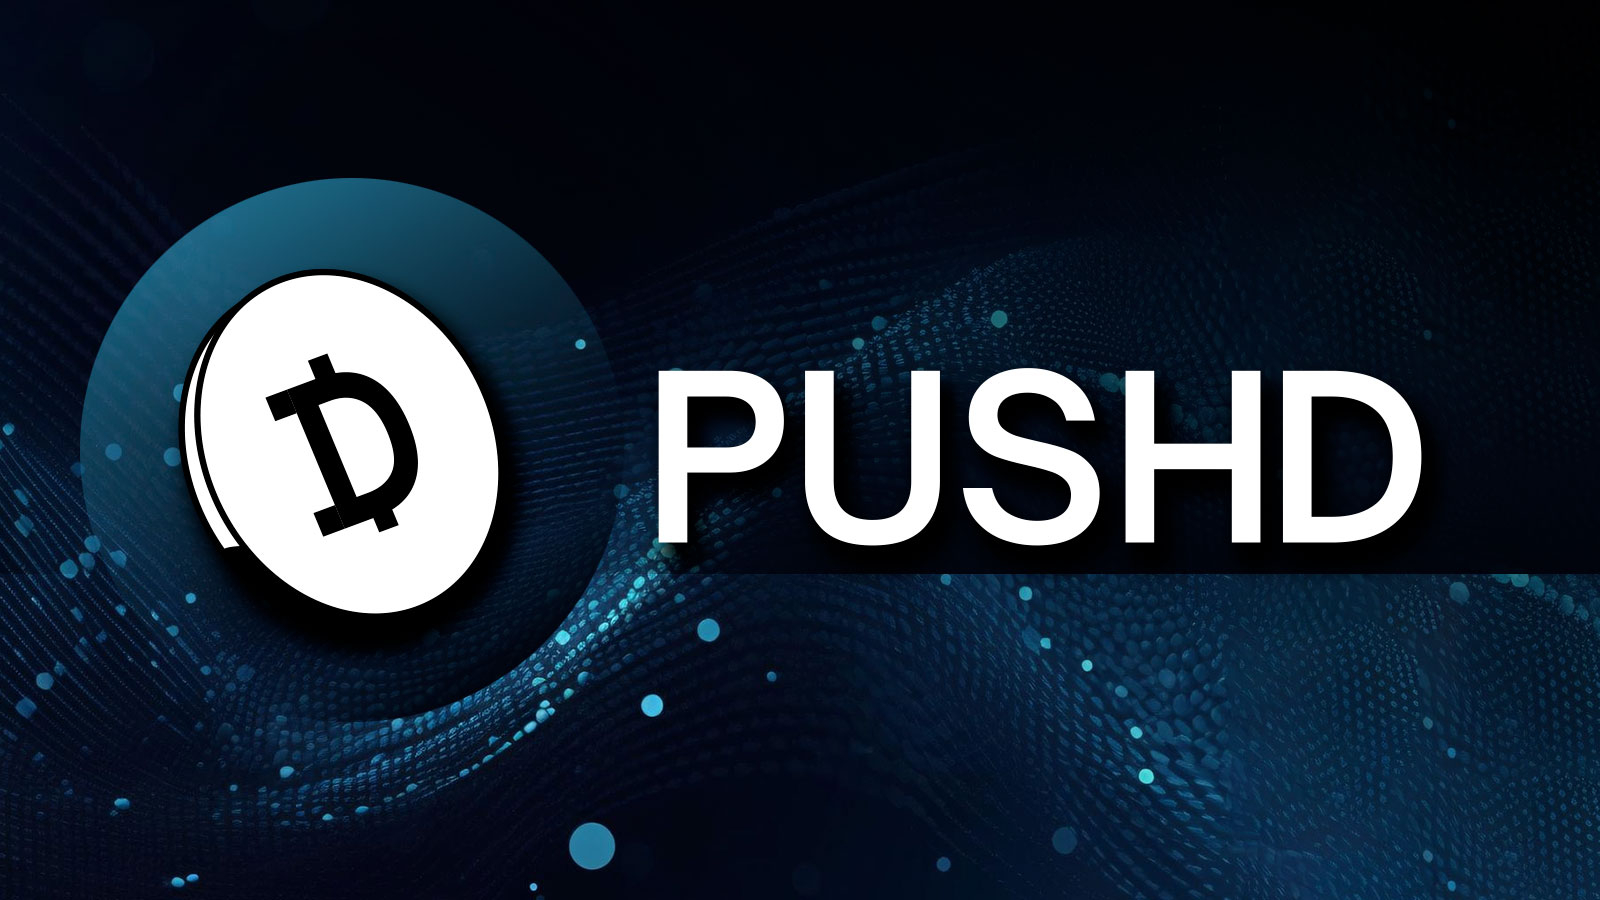 Pushd (PUSHD) Crypto Token Sale Might be Spotlighted in March as Bitcoin (BTC) and Chainlink (LINK) Top Altcoins Recovering